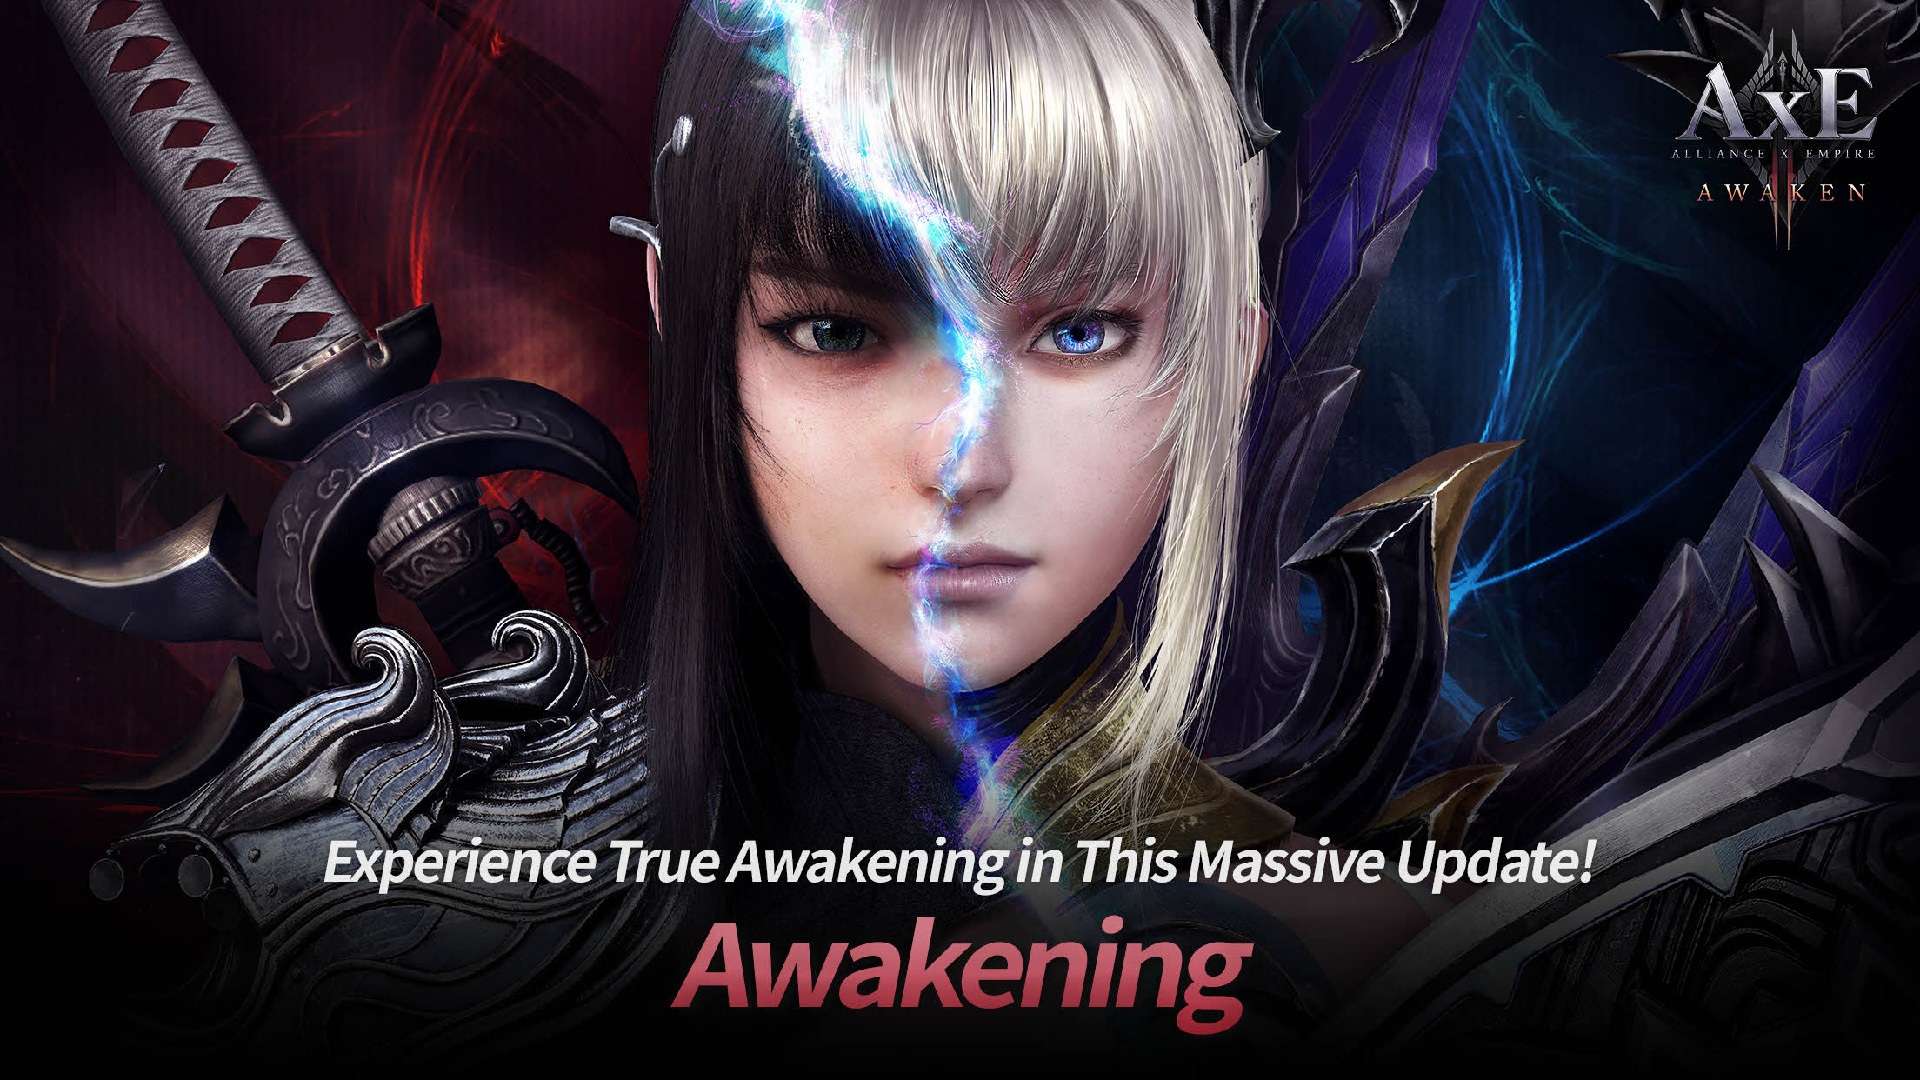 AxE: ALLIANCE VS EMPIRE New Awakening System Fortifies Powerful Roster of Heroes